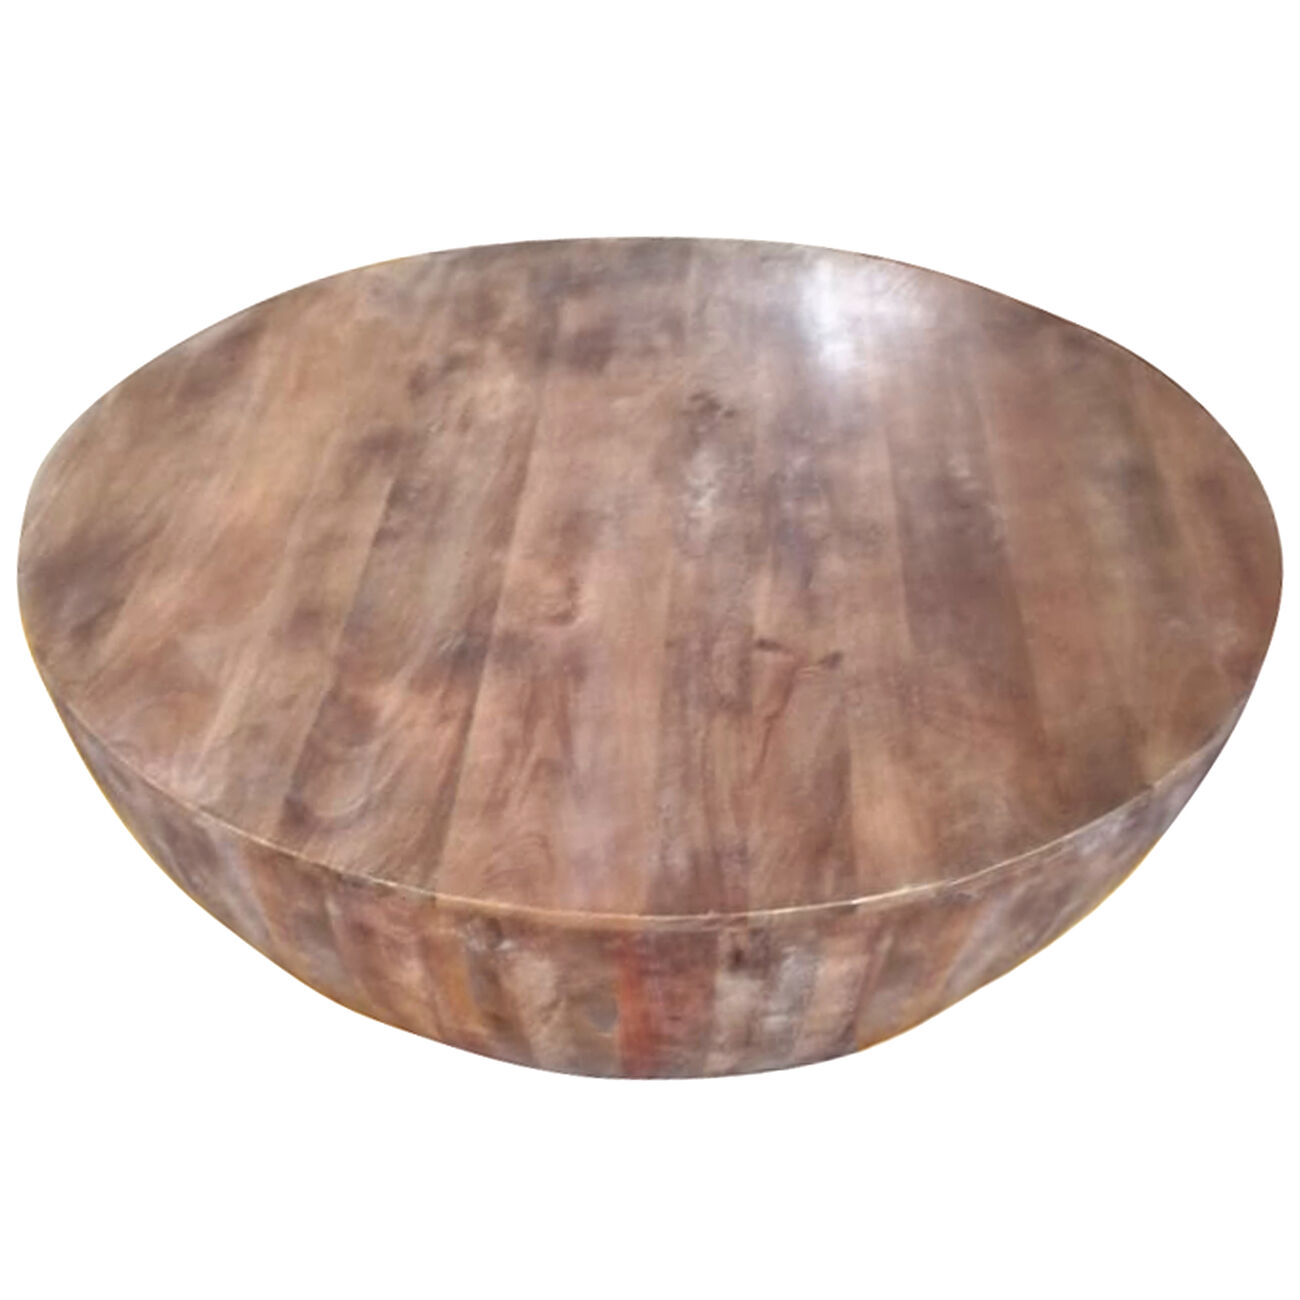 Handcarved Drum Shape Round Top Mango Wood Distressed Wooden Coffee Table, Brown